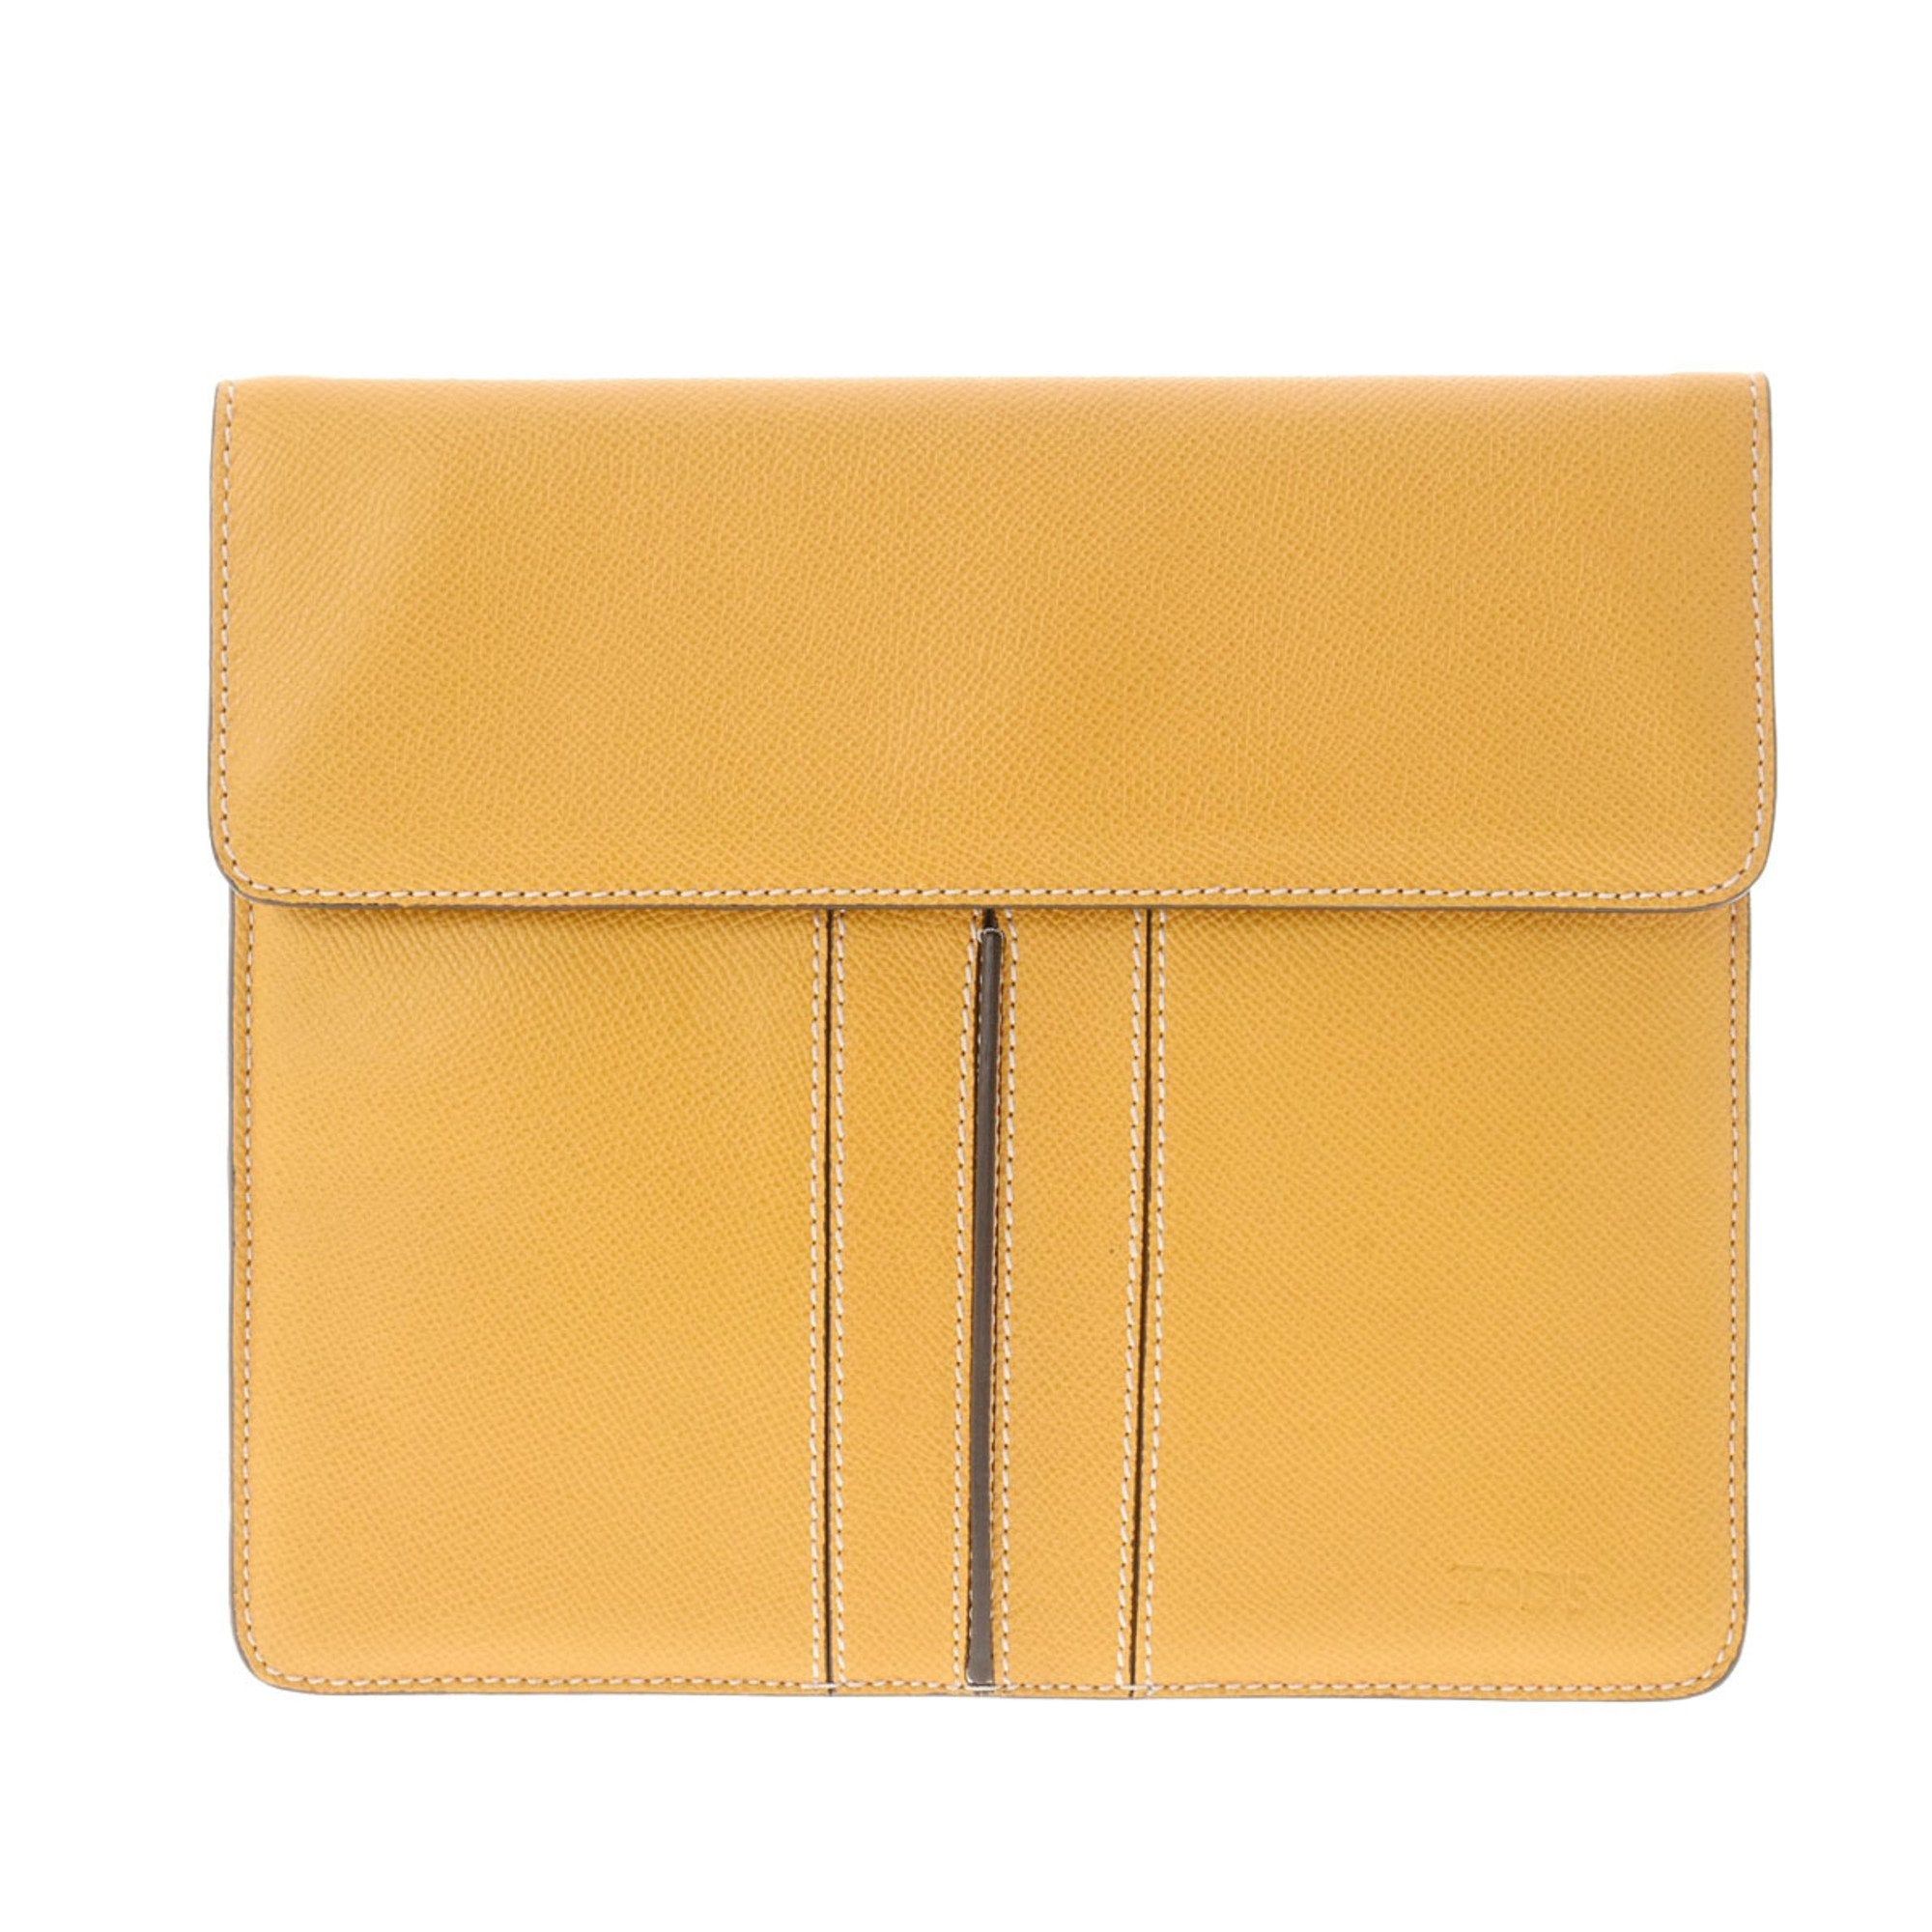 Tod's TOD'S Yellow Ladies Leather Shoulder Bag | Grailed